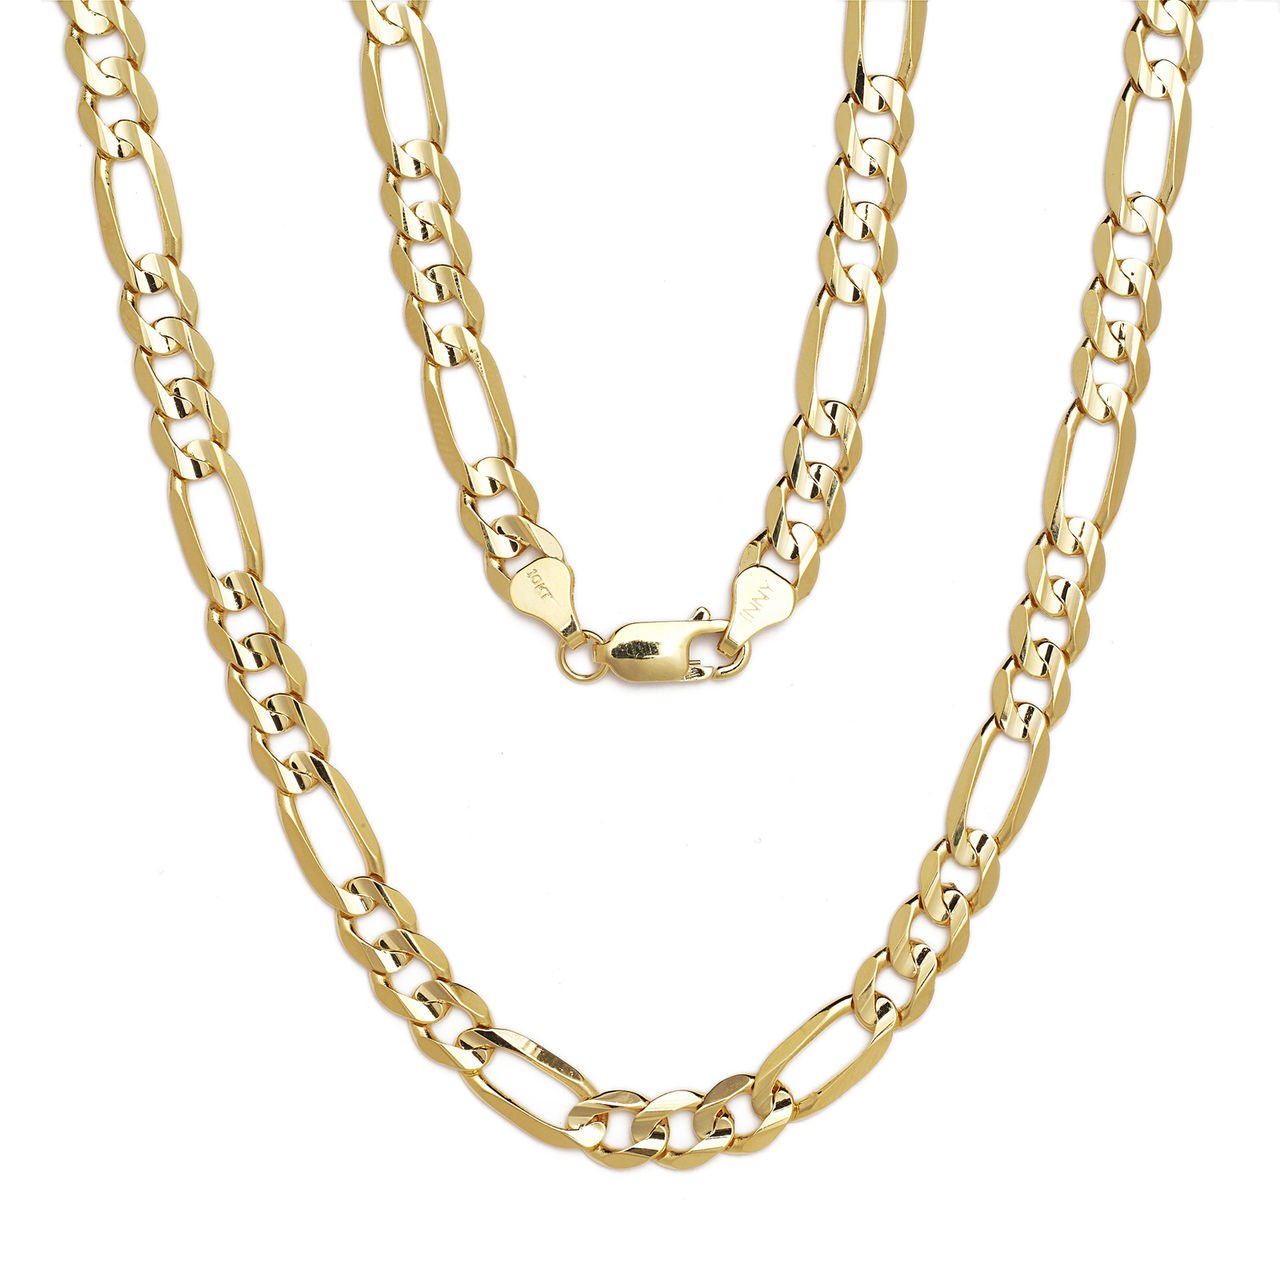 Floreo 10k Yellow Gold 7mm Figaro Chain Necklace with Concave Look